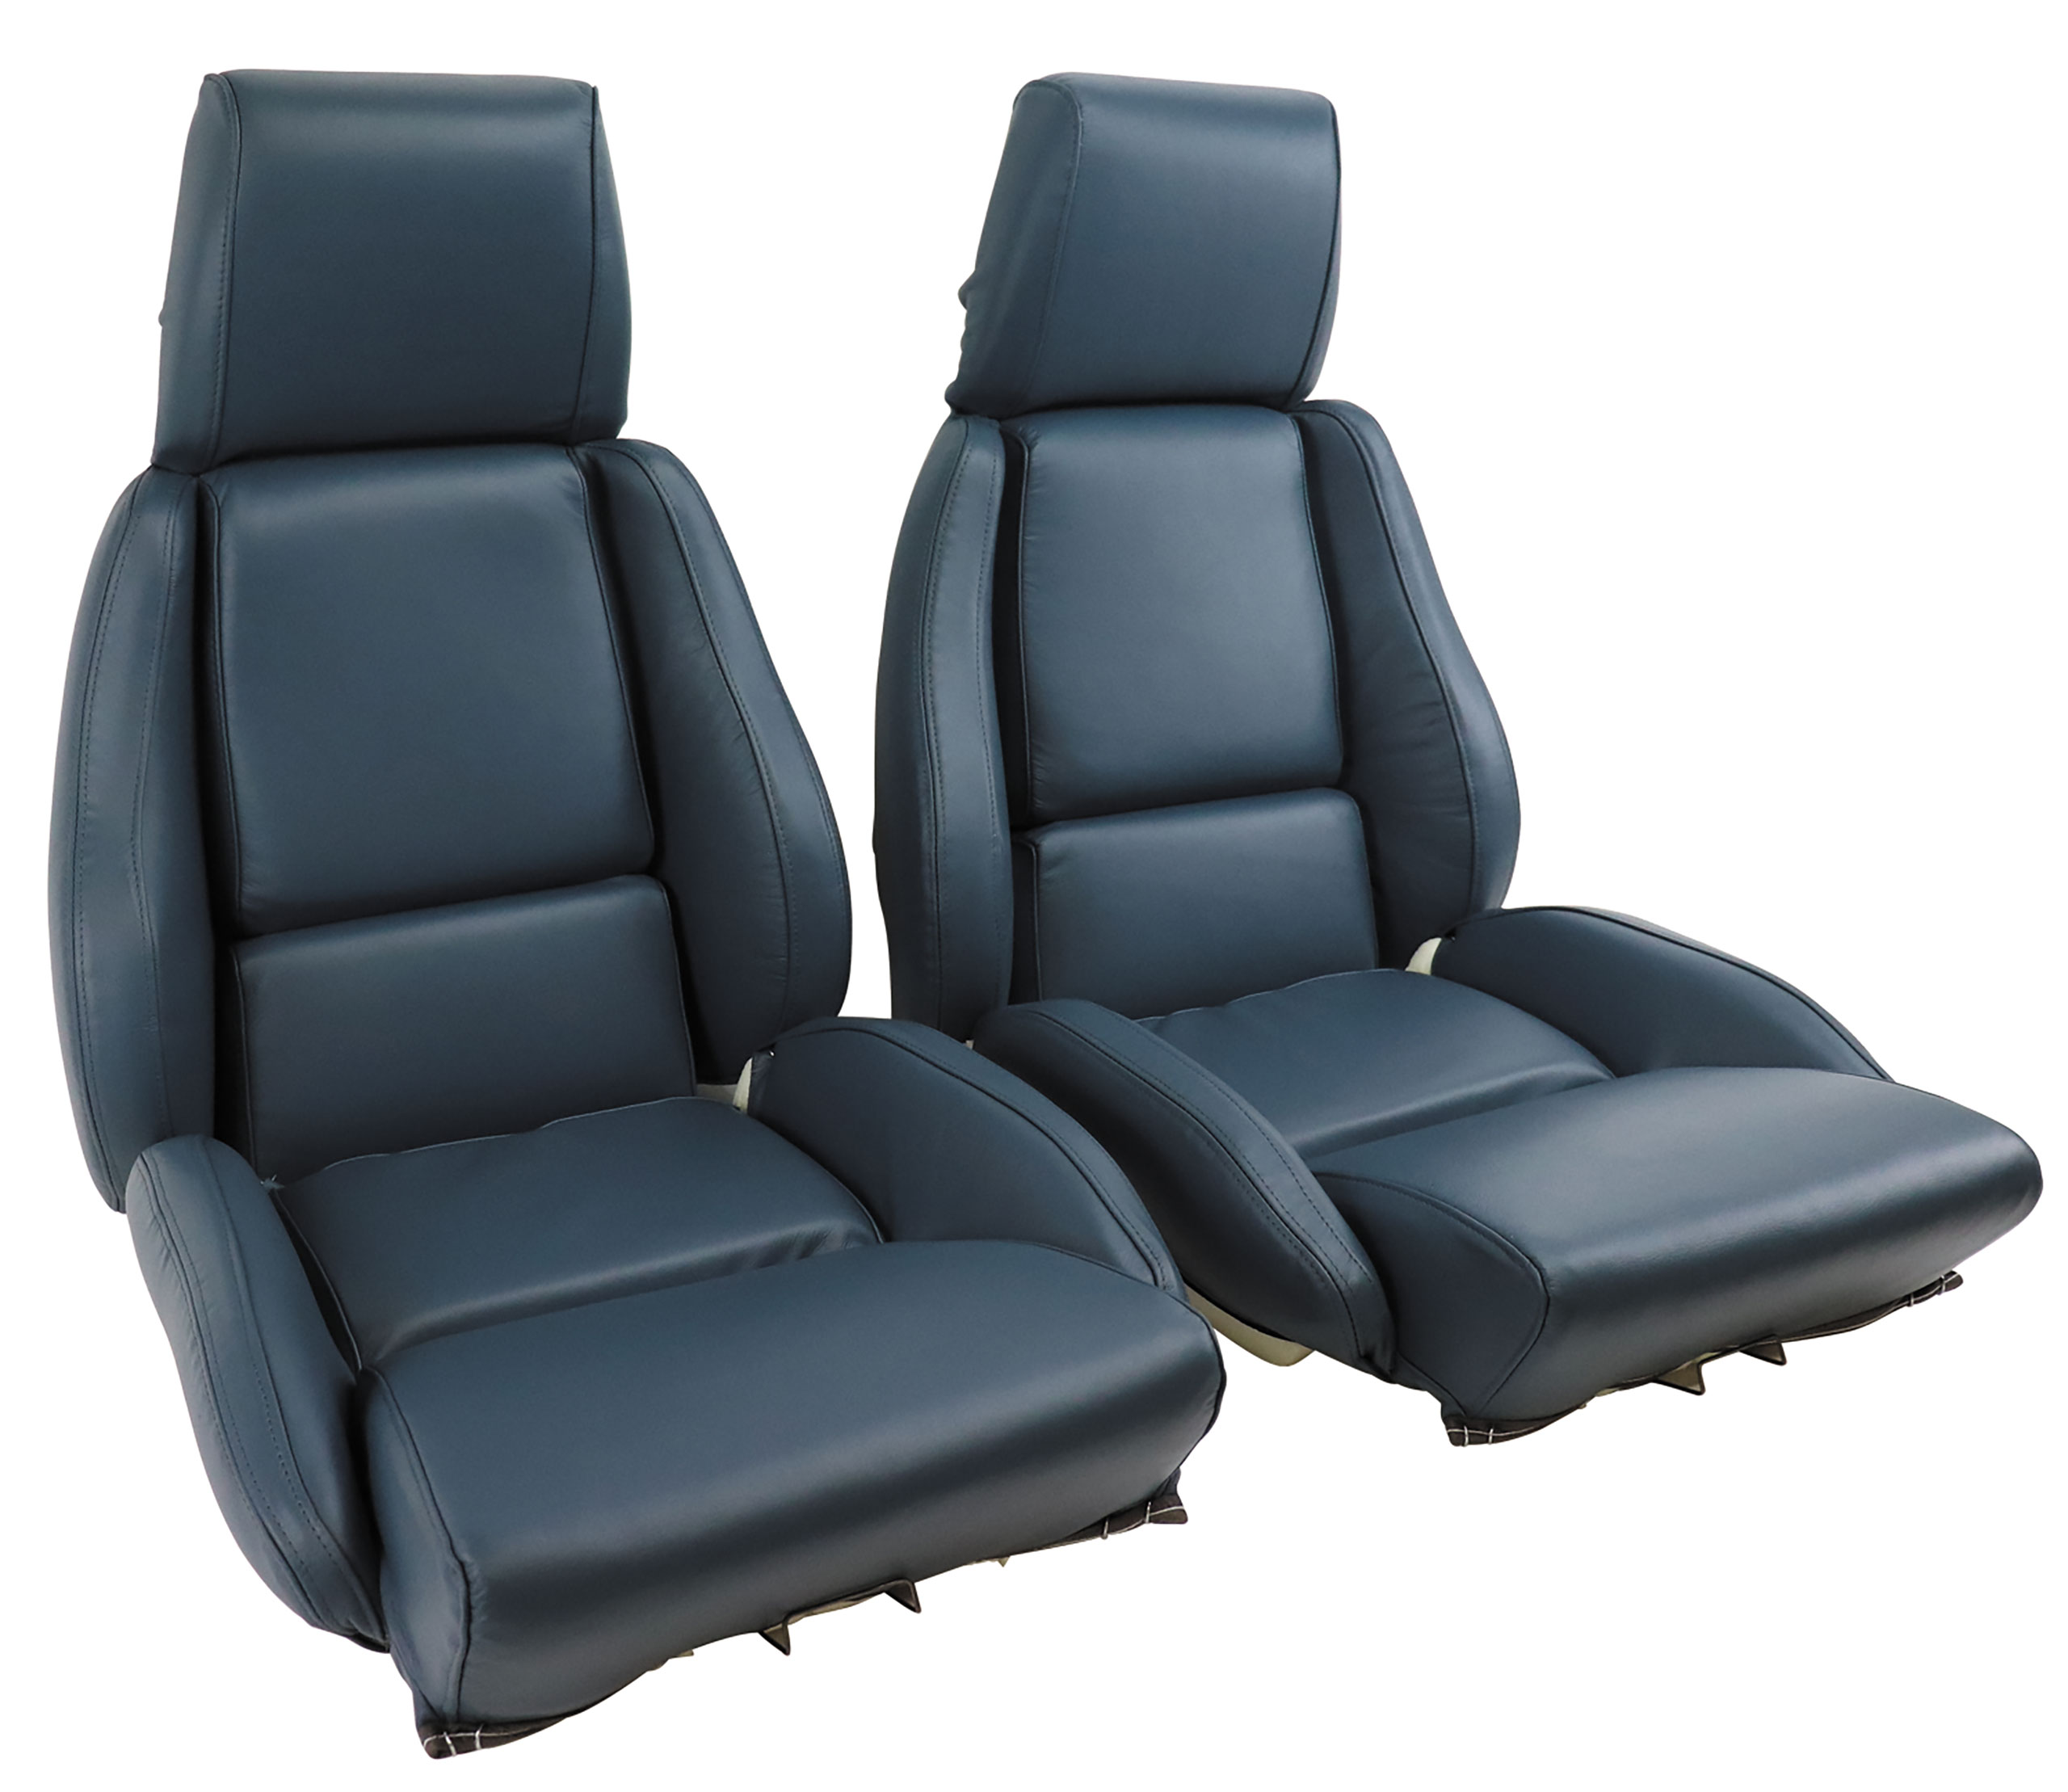 1984-1985 C4 Corvette Mounted Leather Seat Covers Blue Standard No-Perforations